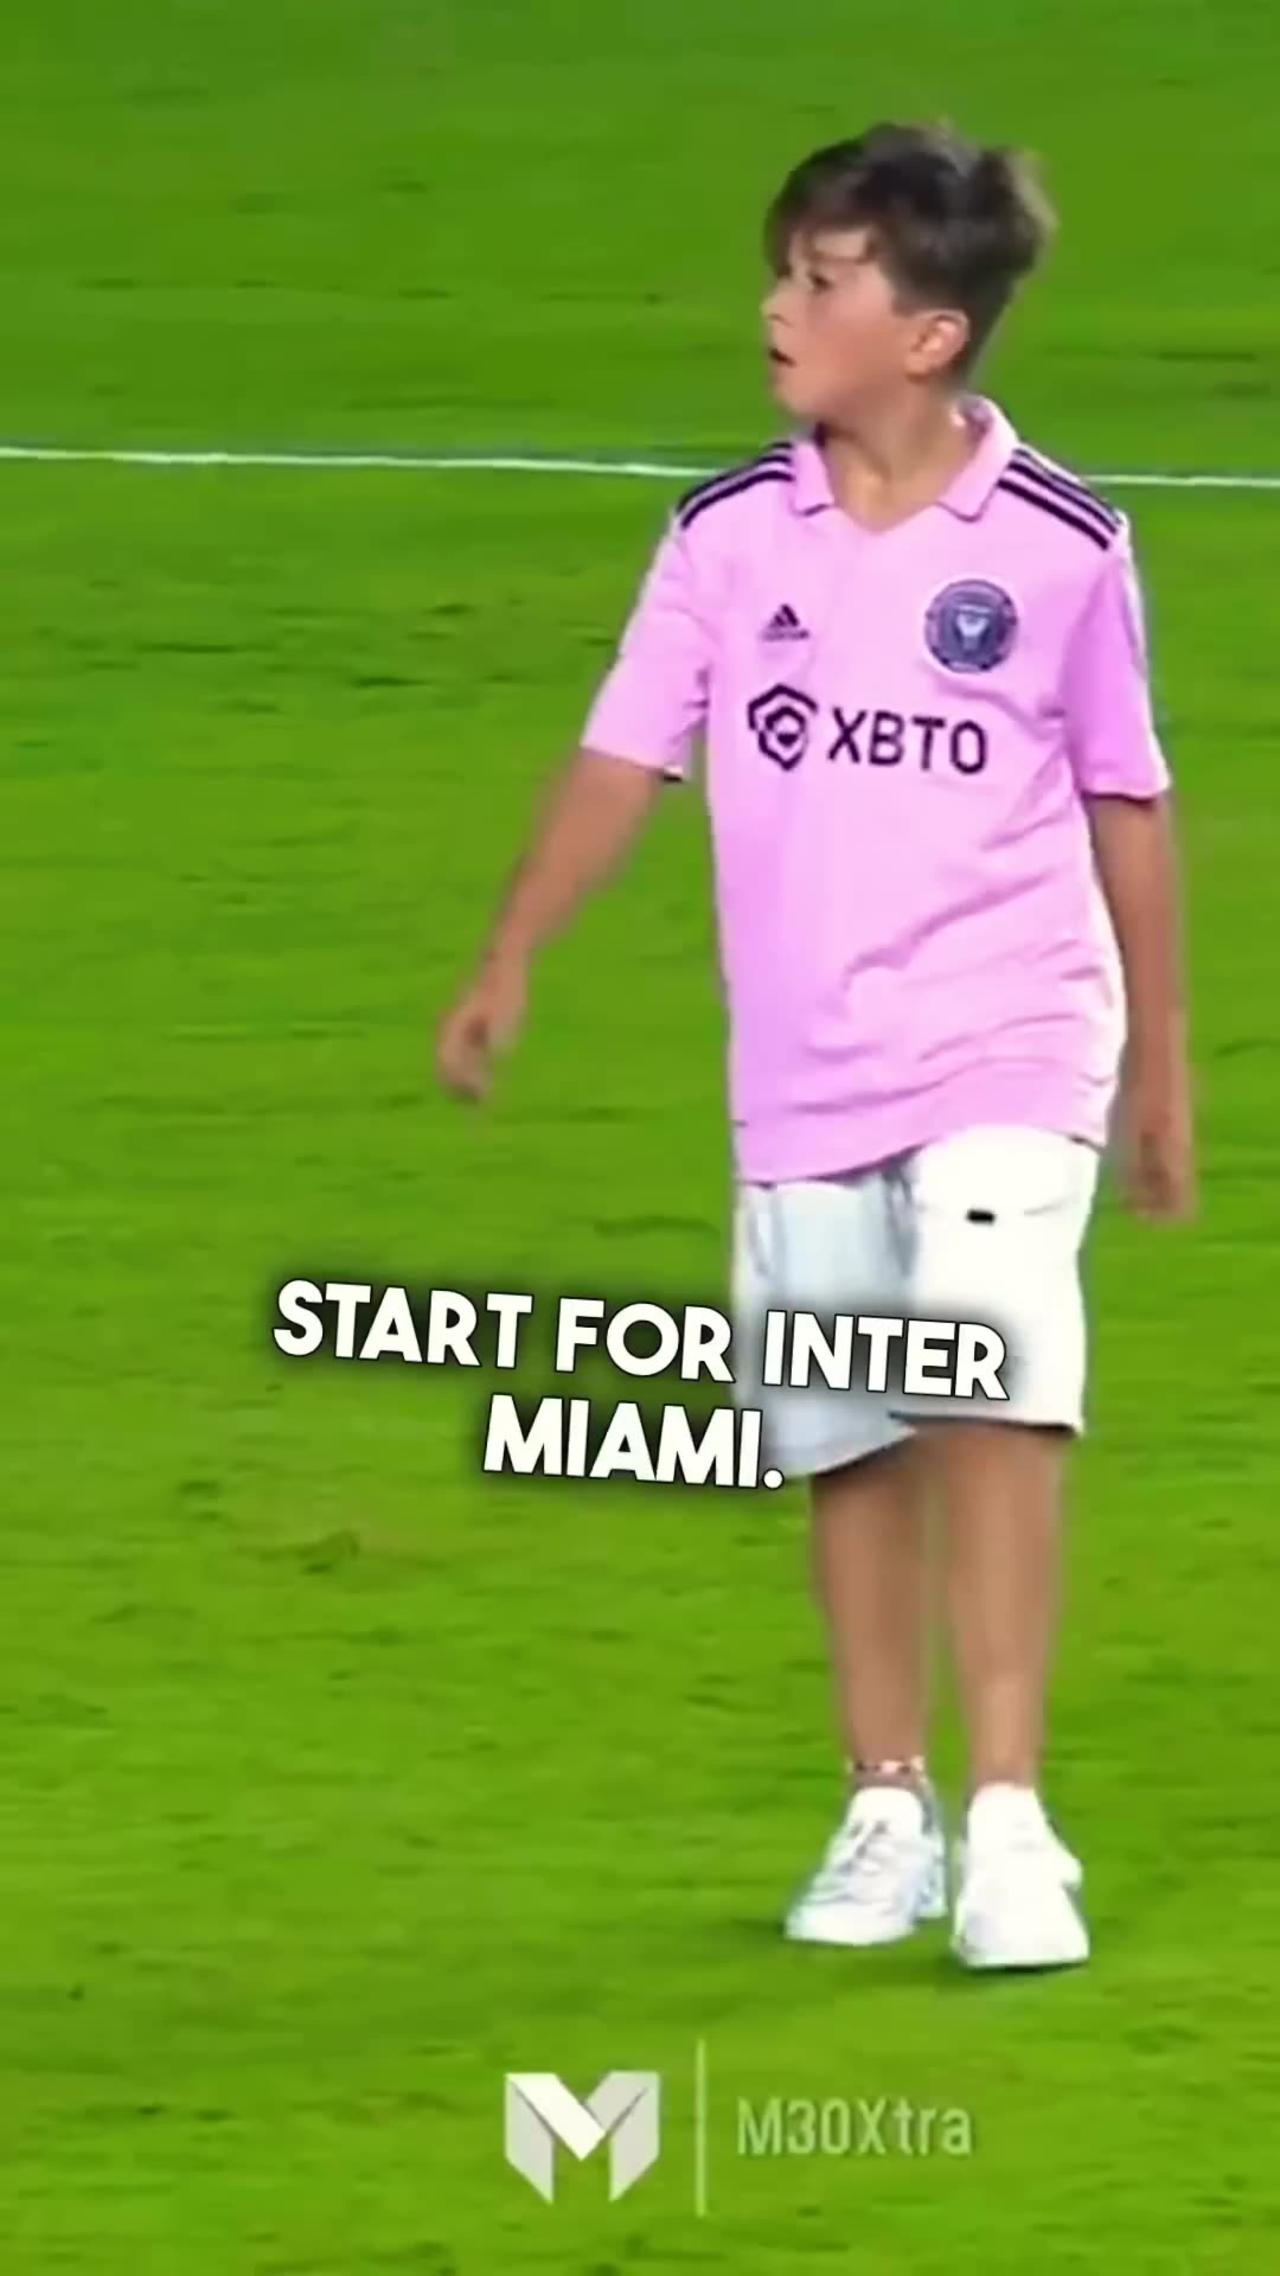 Thiago Messi shows off skills after Lionel Messi’s first start for Inter Miami 👀🔥 #shorts #messi_2